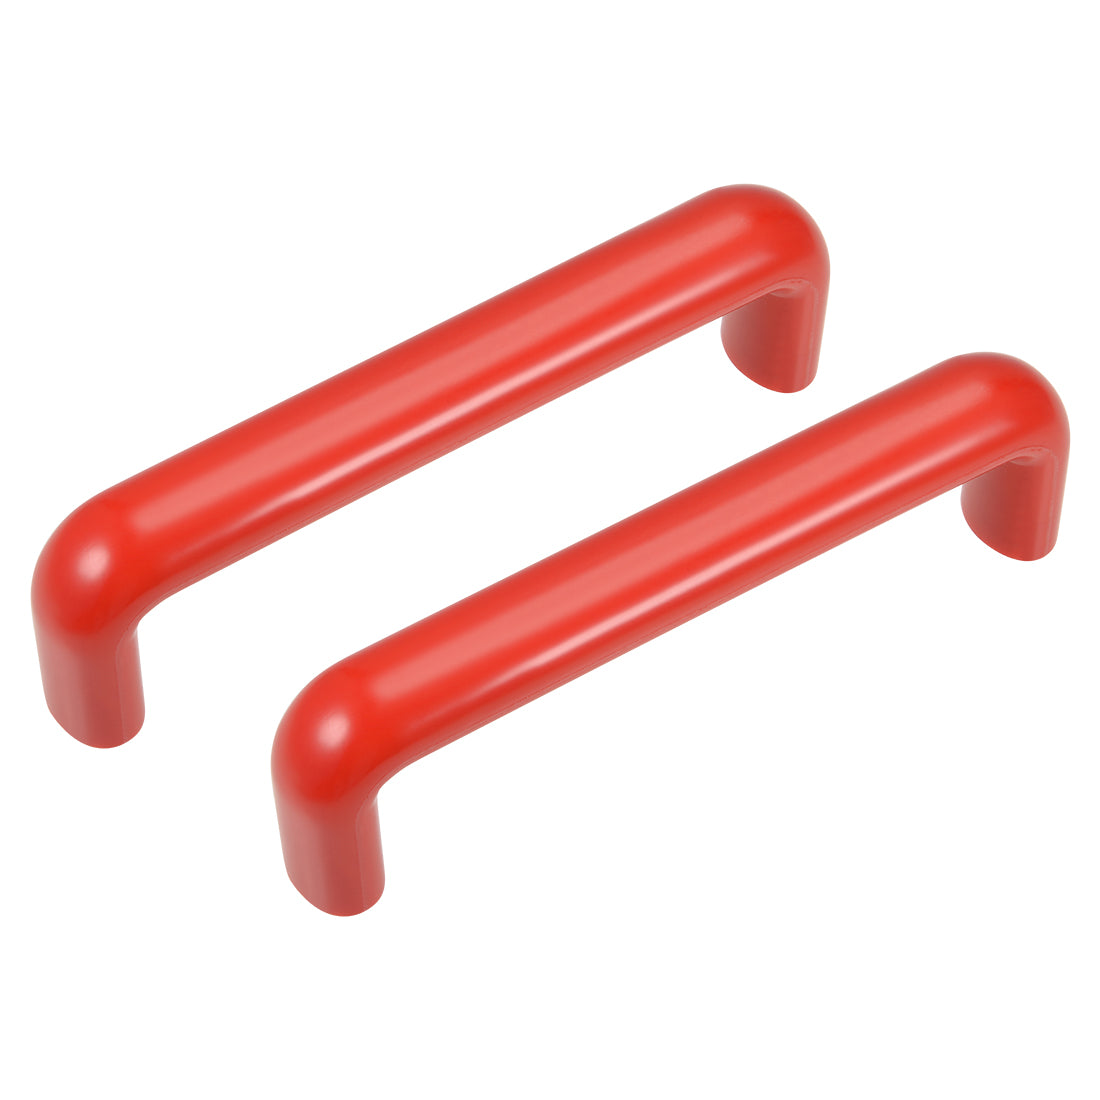 uxcell Uxcell Bakelite Plastic Pulls Handle 180mm Hole Centers Red for Industrial Machine 2Pcs